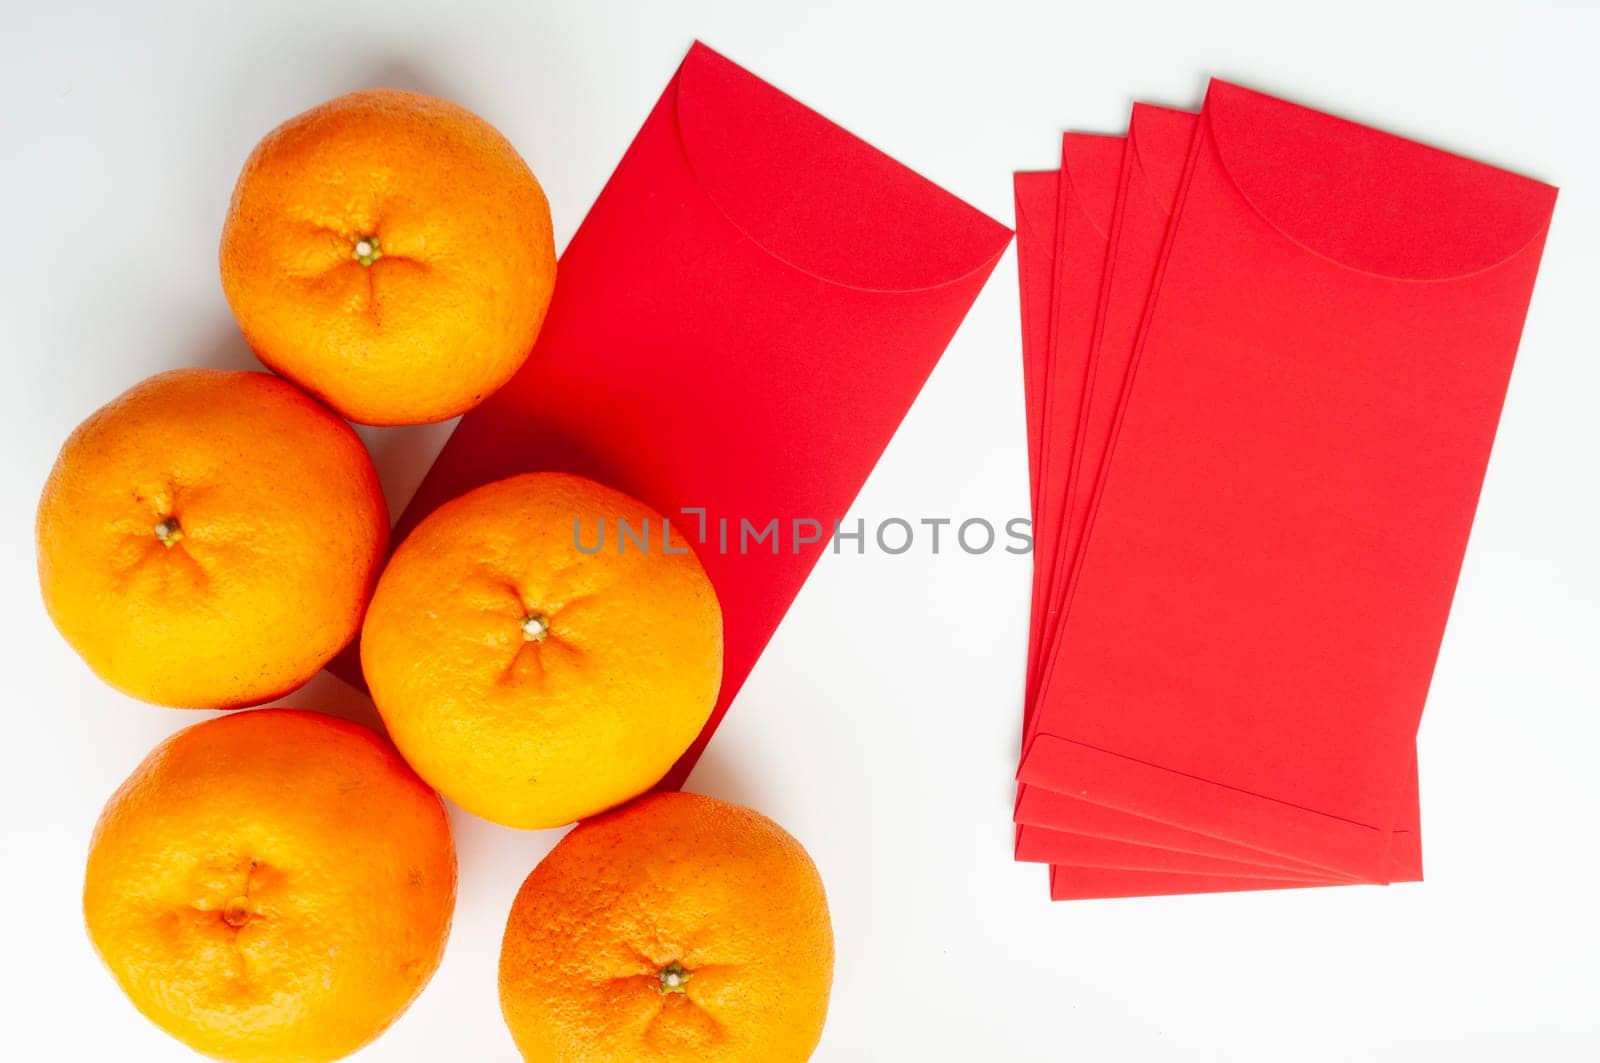 Top view of Mandarin oranges and Chinese New Year red envelope. Chinese New Year celebration concept.